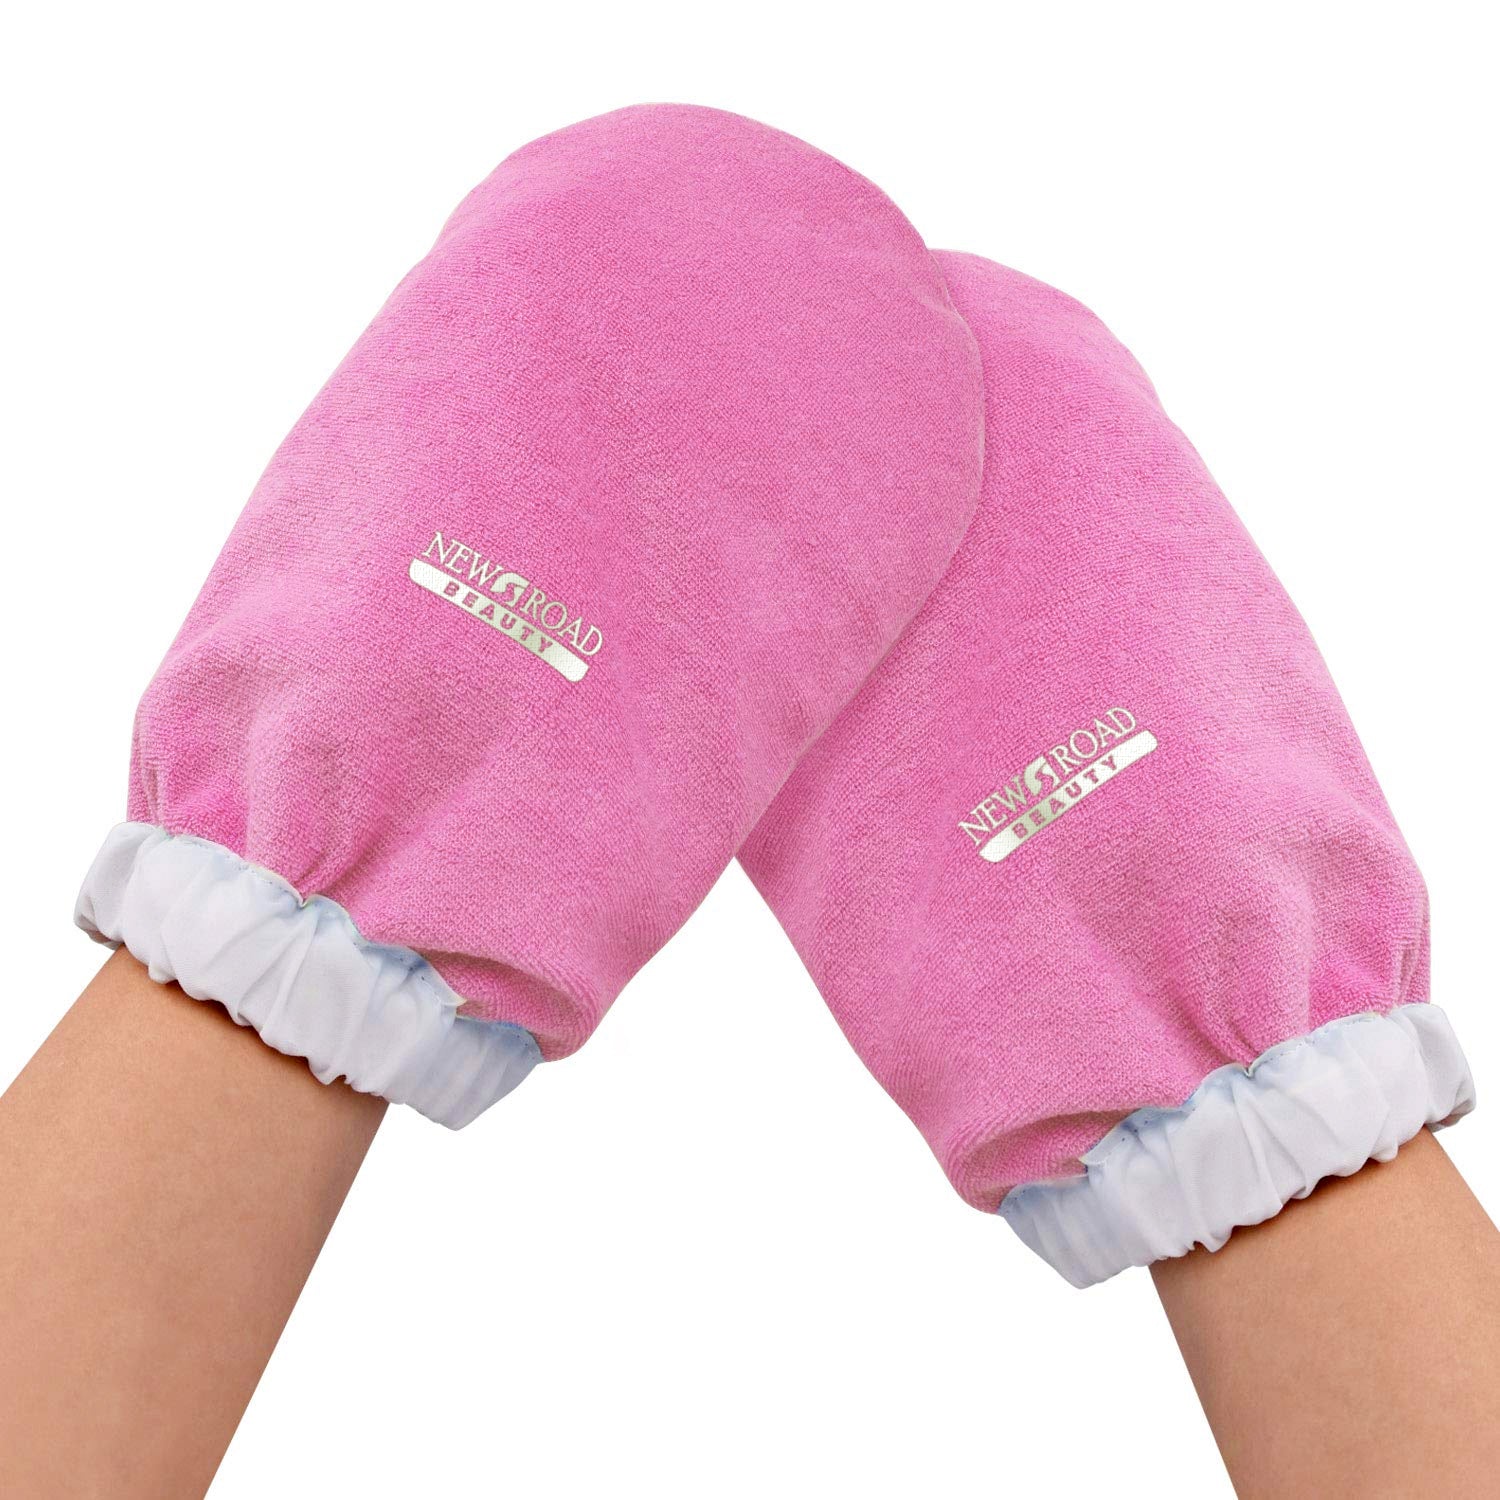 Paraffin Wax Pink Gloves/Mitts and Booties to use while doing a paraffin wax treatment.